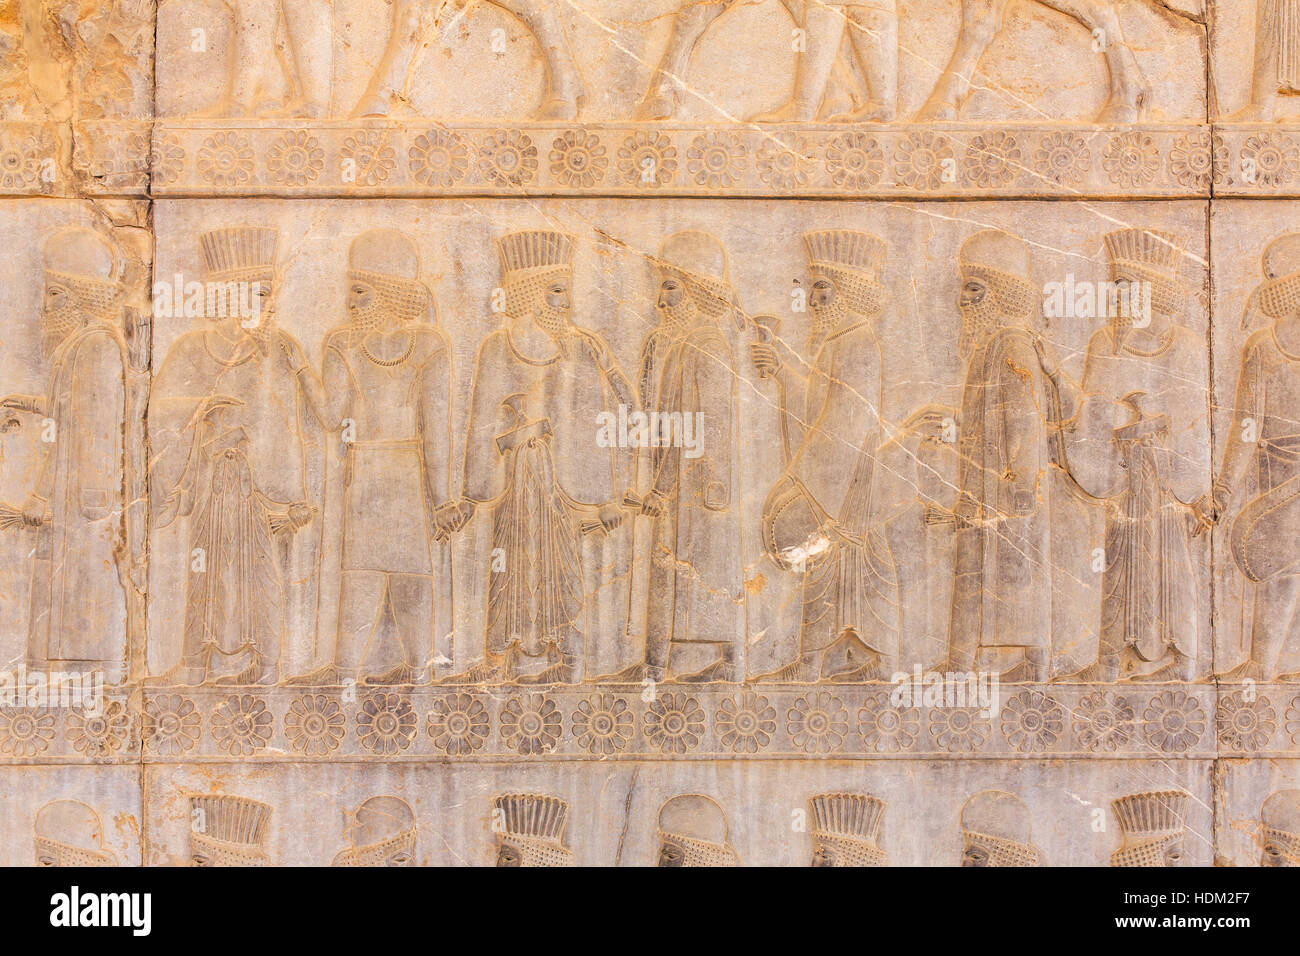 Stone bas-relief in ancient city Persepolis, Iran. Stock Photo